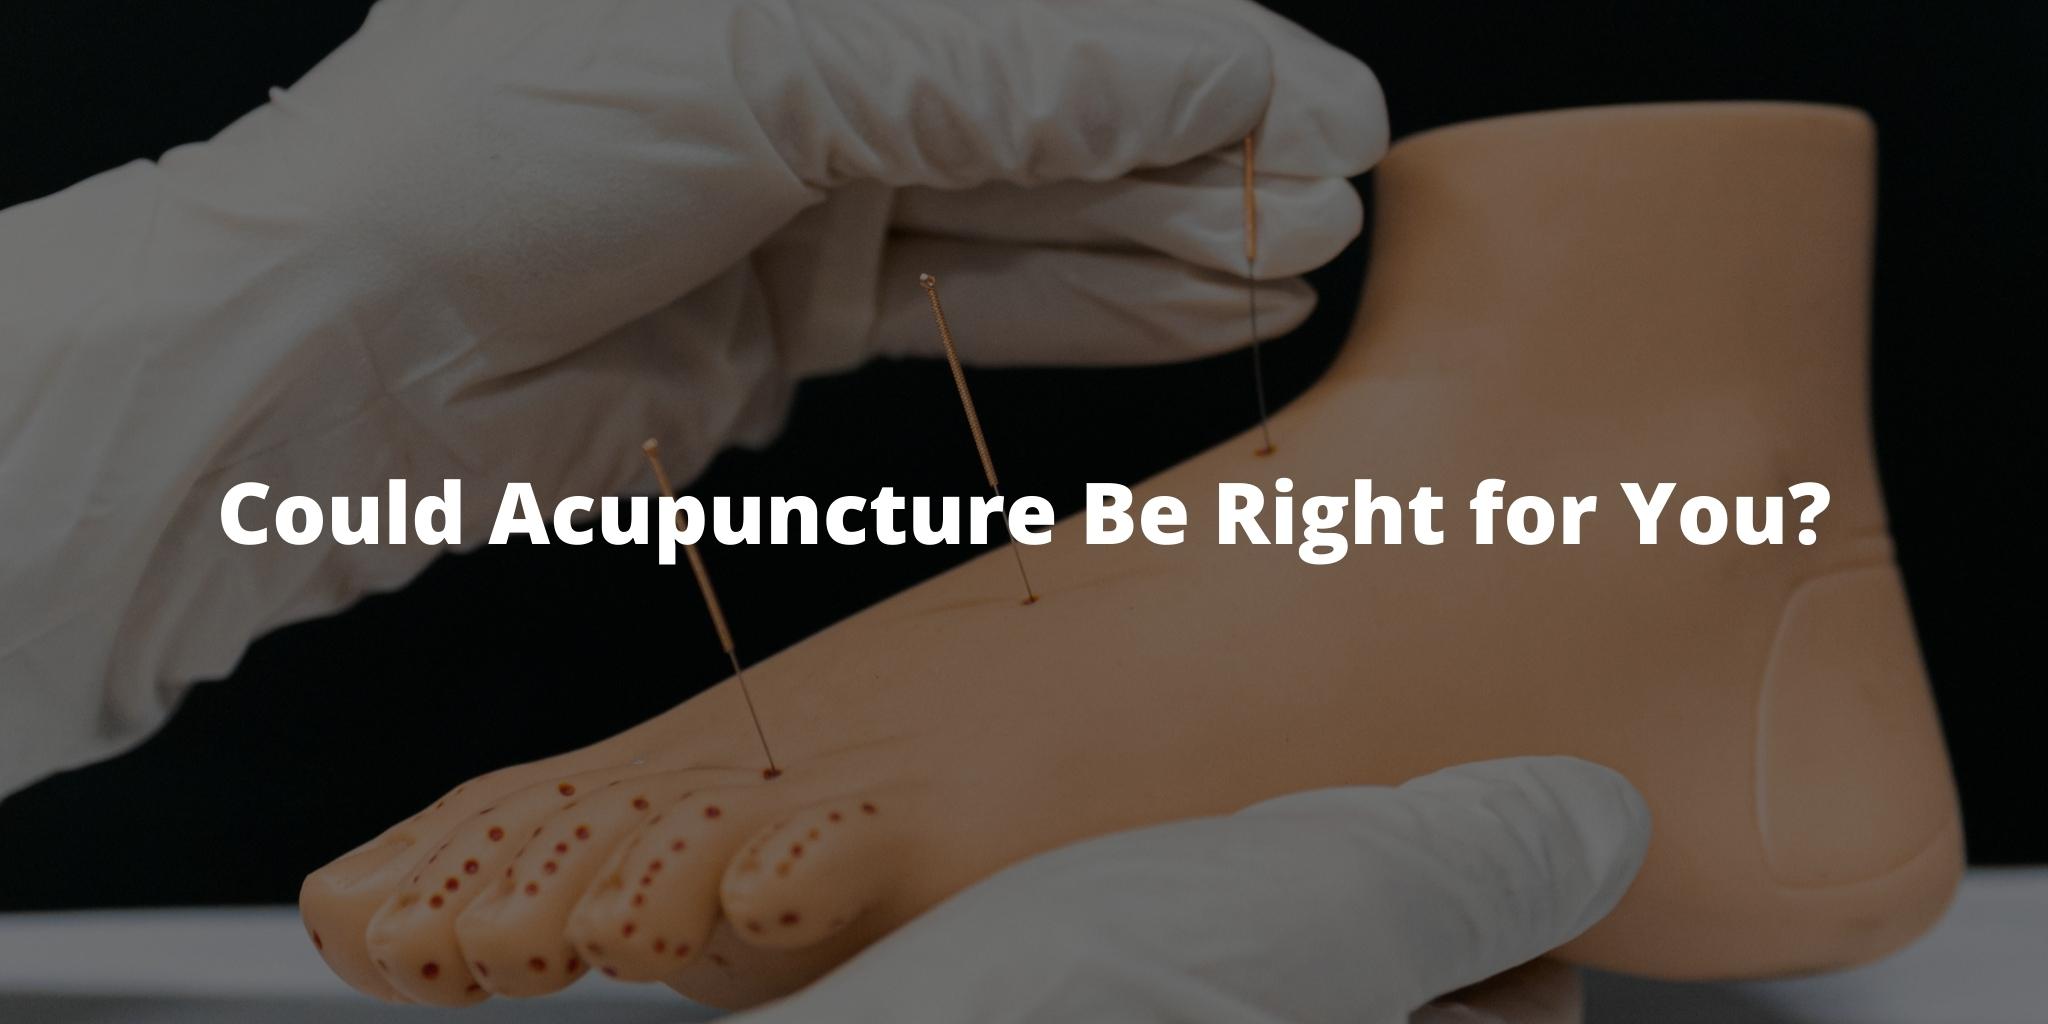 Could Acupuncture Be Right for You?